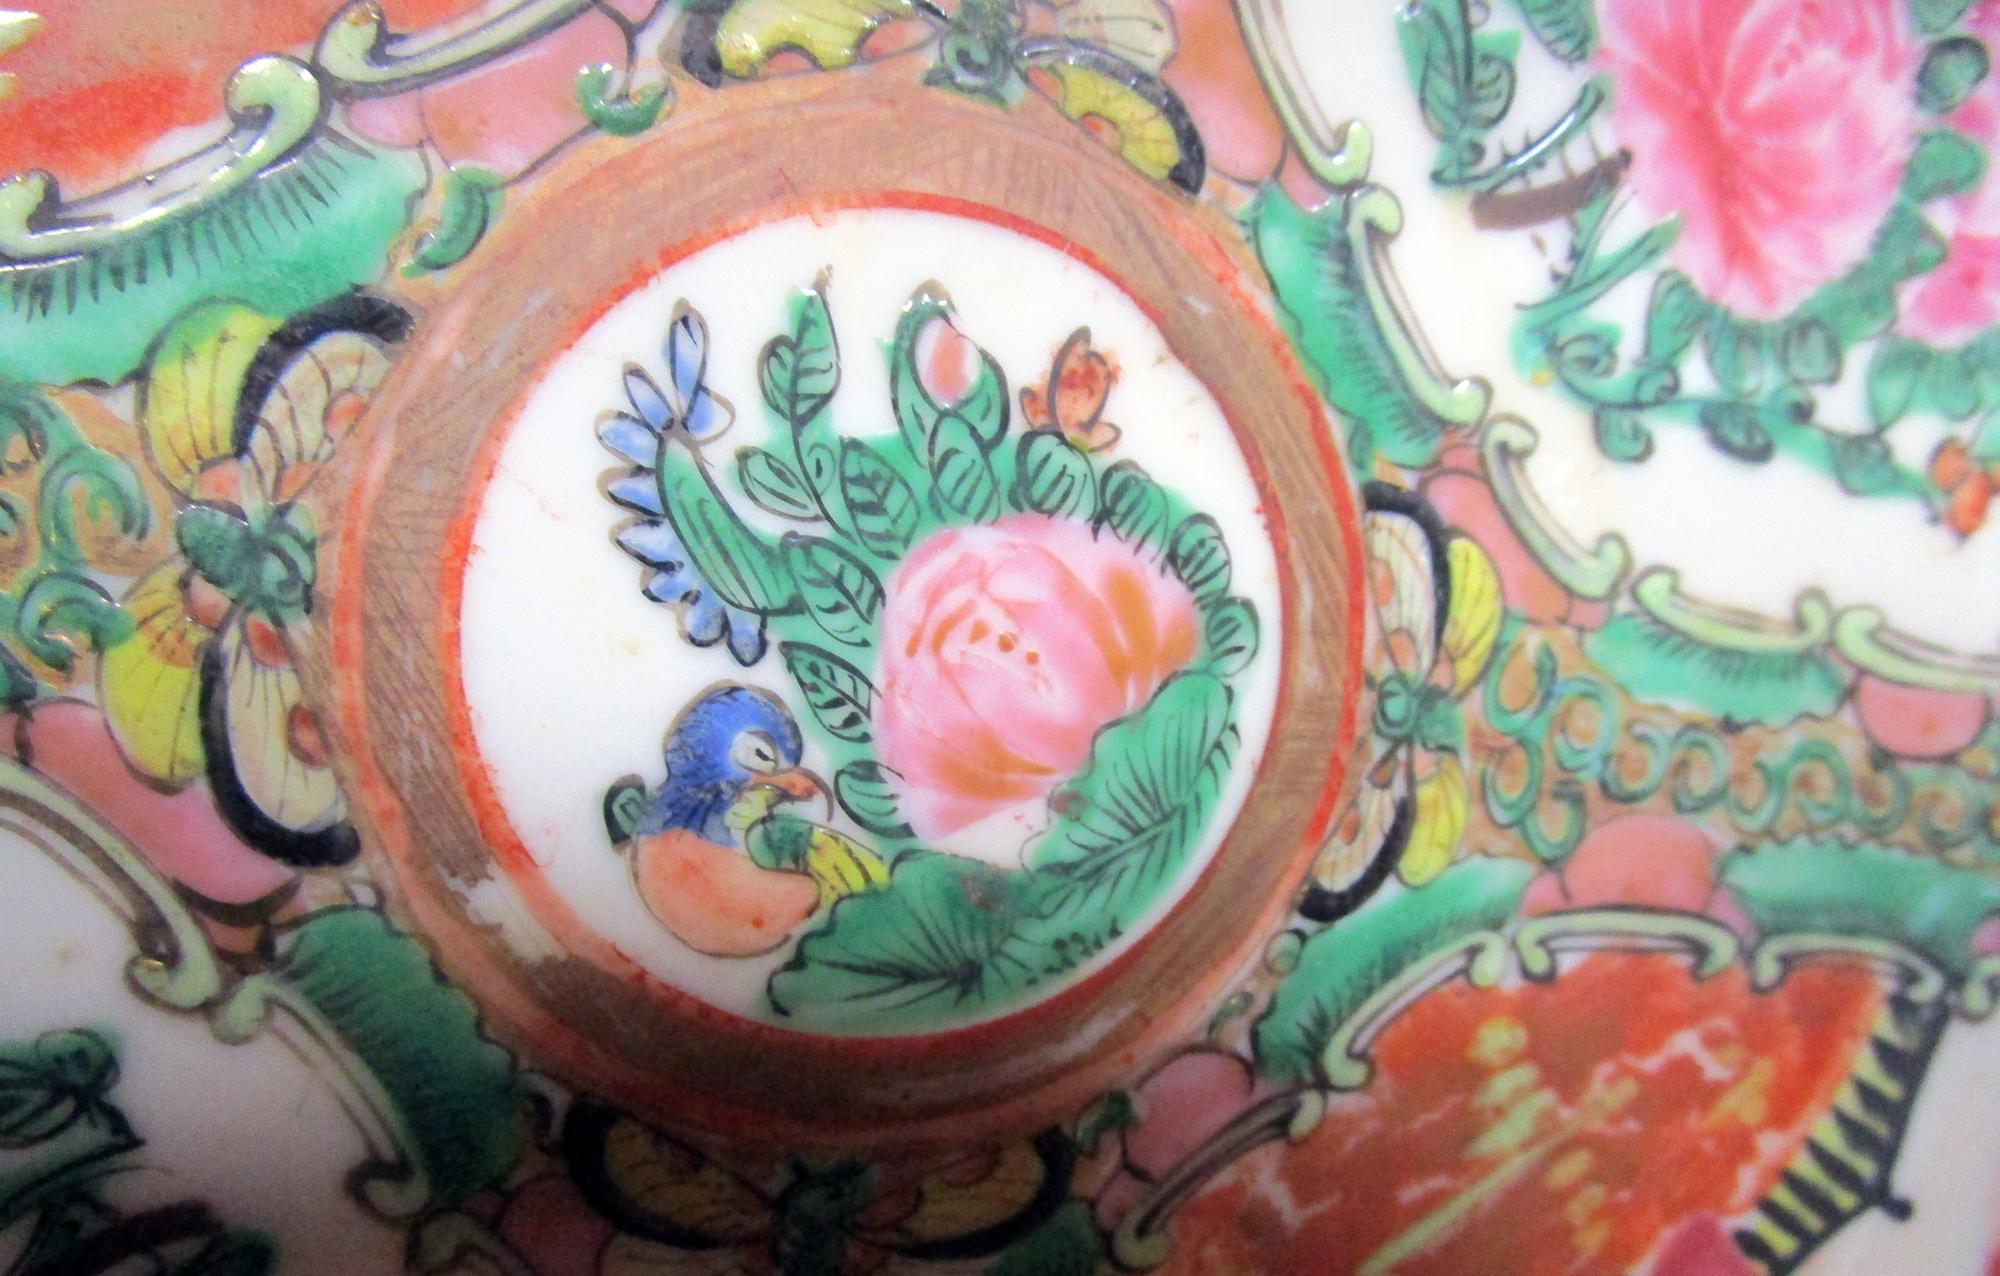 Set of four Chinese export late Qing period rose medallion dinner plates featuring traditional medallion design with figures in scenes, floral and bird panels. The pink rose and bird center medallions vary- see image closeups. Please note that the